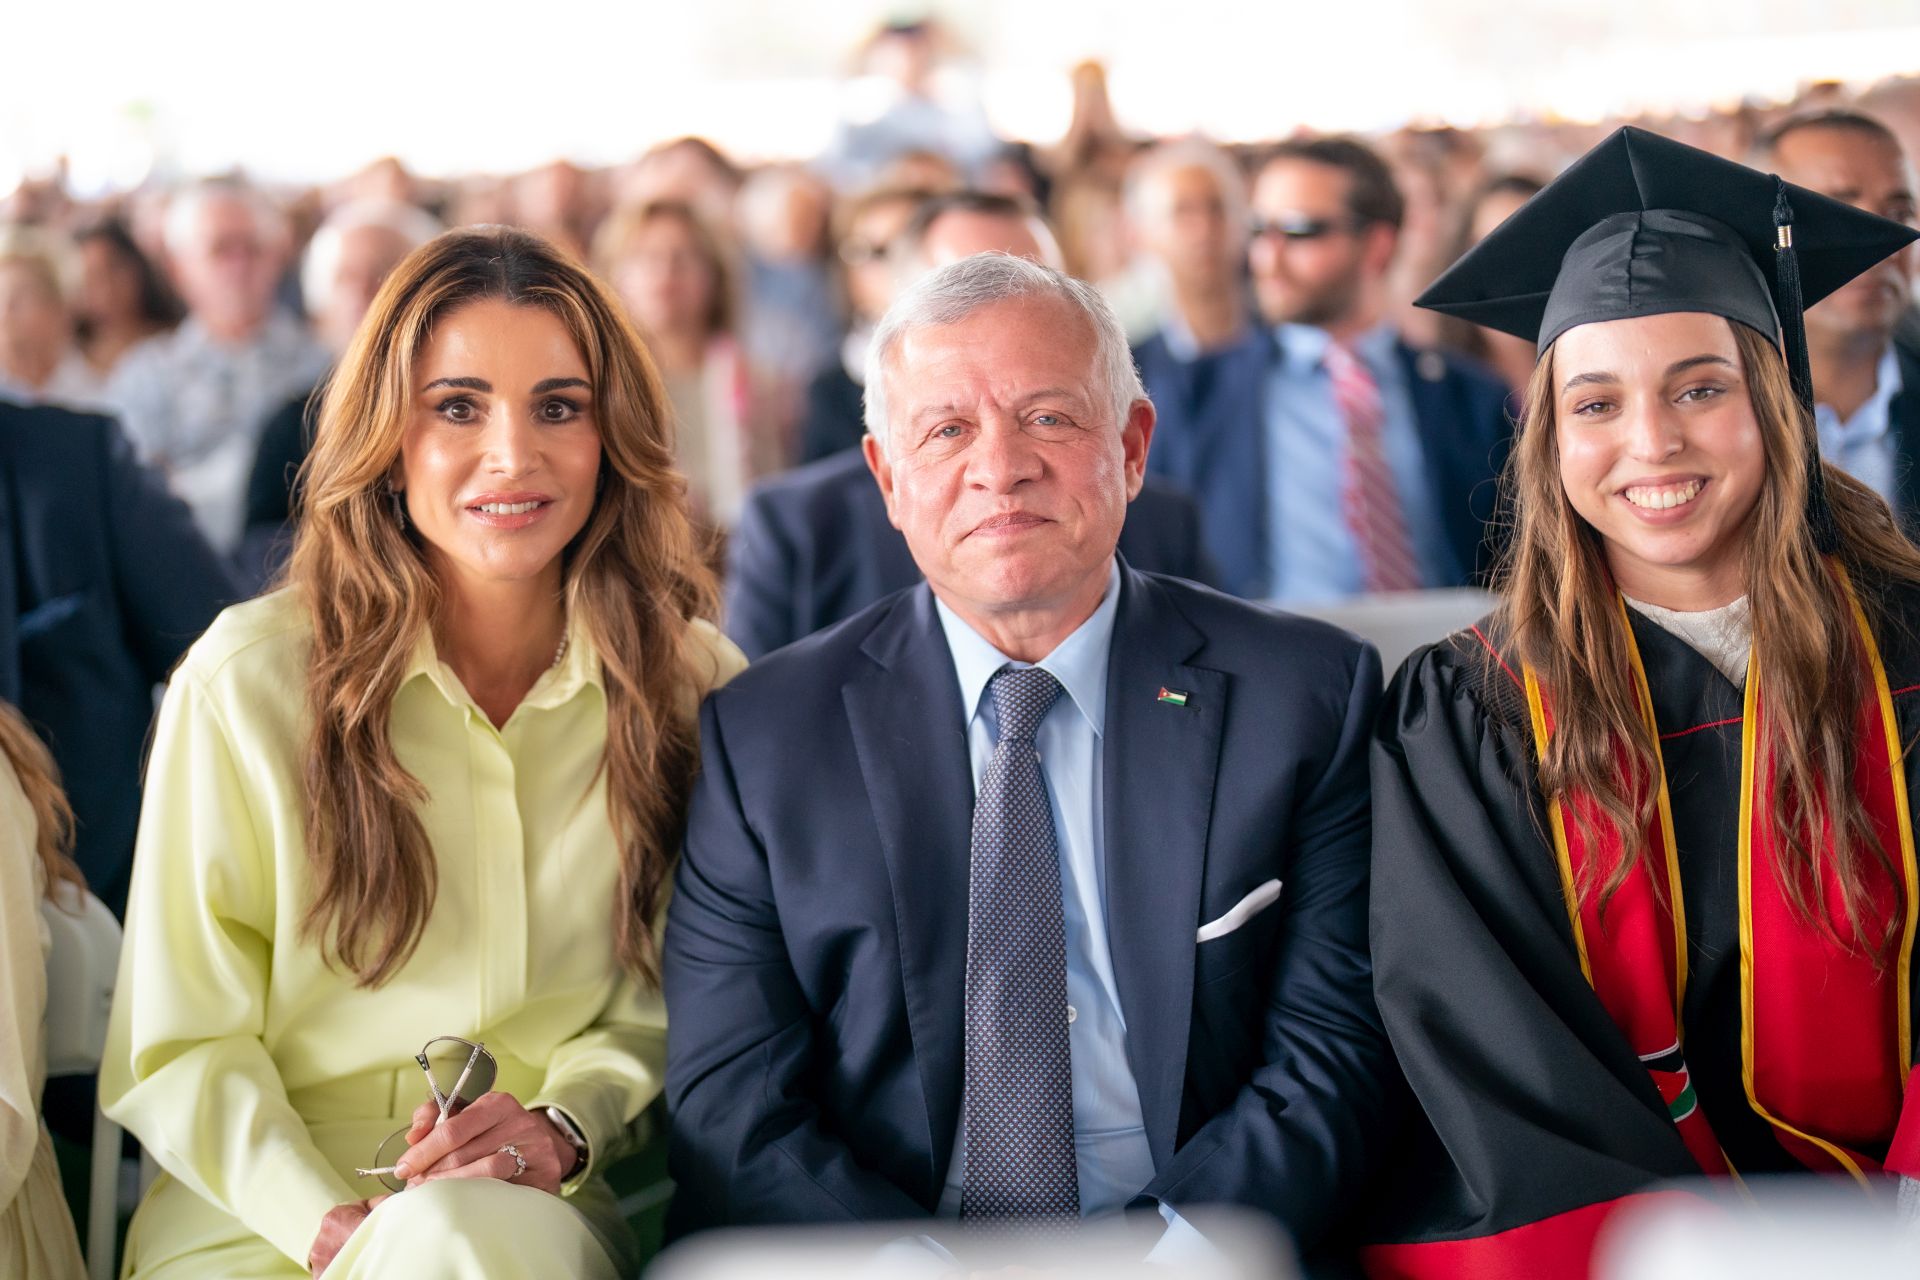 Their Majesties King Abdullah II and Queen Rania, Her Royal Highness Princess Iman, and Mr. Jameel Thermiotis with Her Royal Highness Princess Salma at her graduation from the University of Southern California